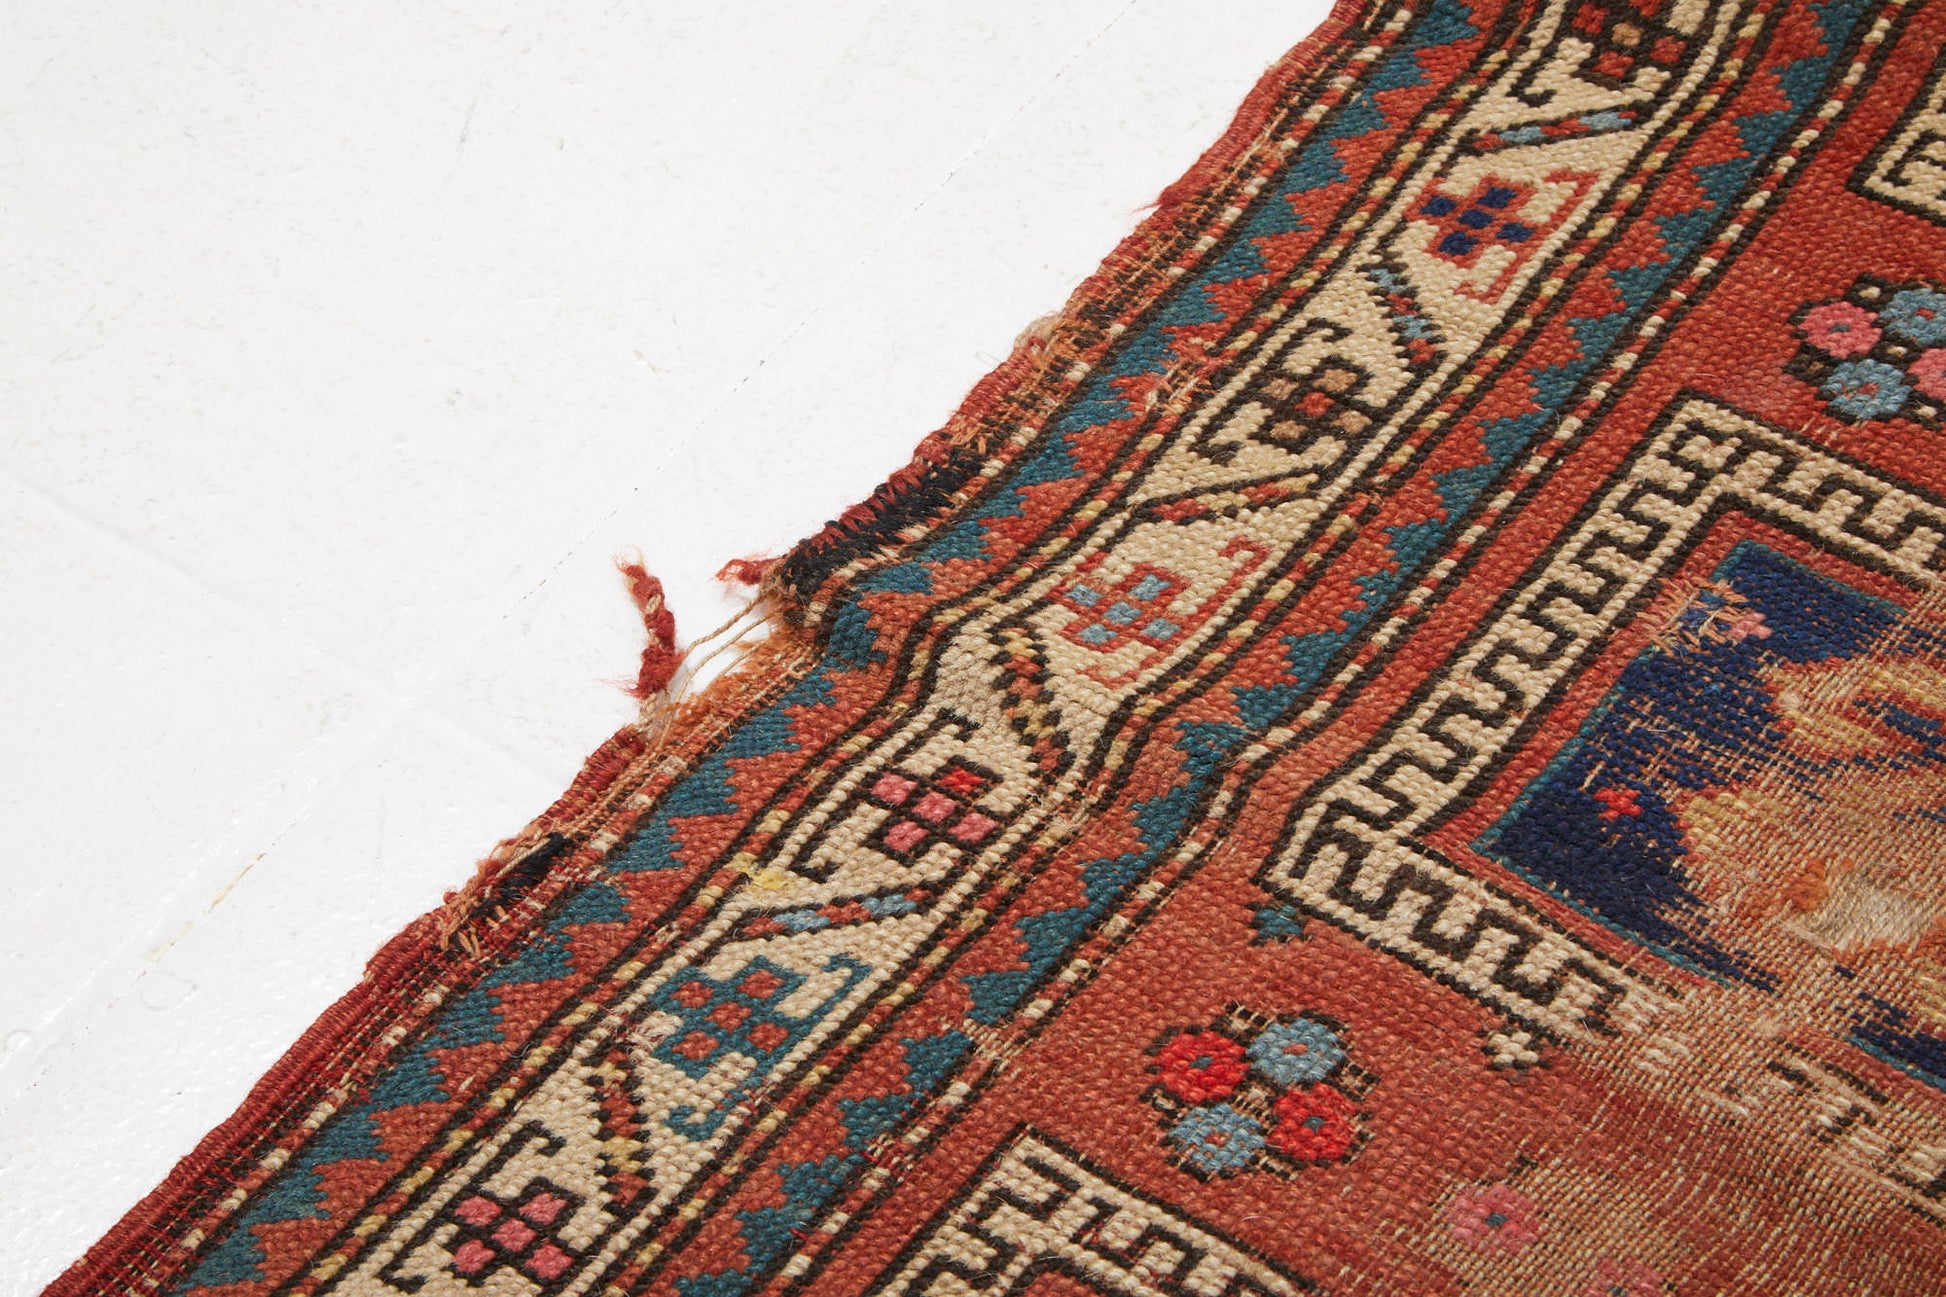 Antique Persian Kazak Prayer rug with pink red base and blue and cream designs - Available from King Kennedy Rugs Los Angeles